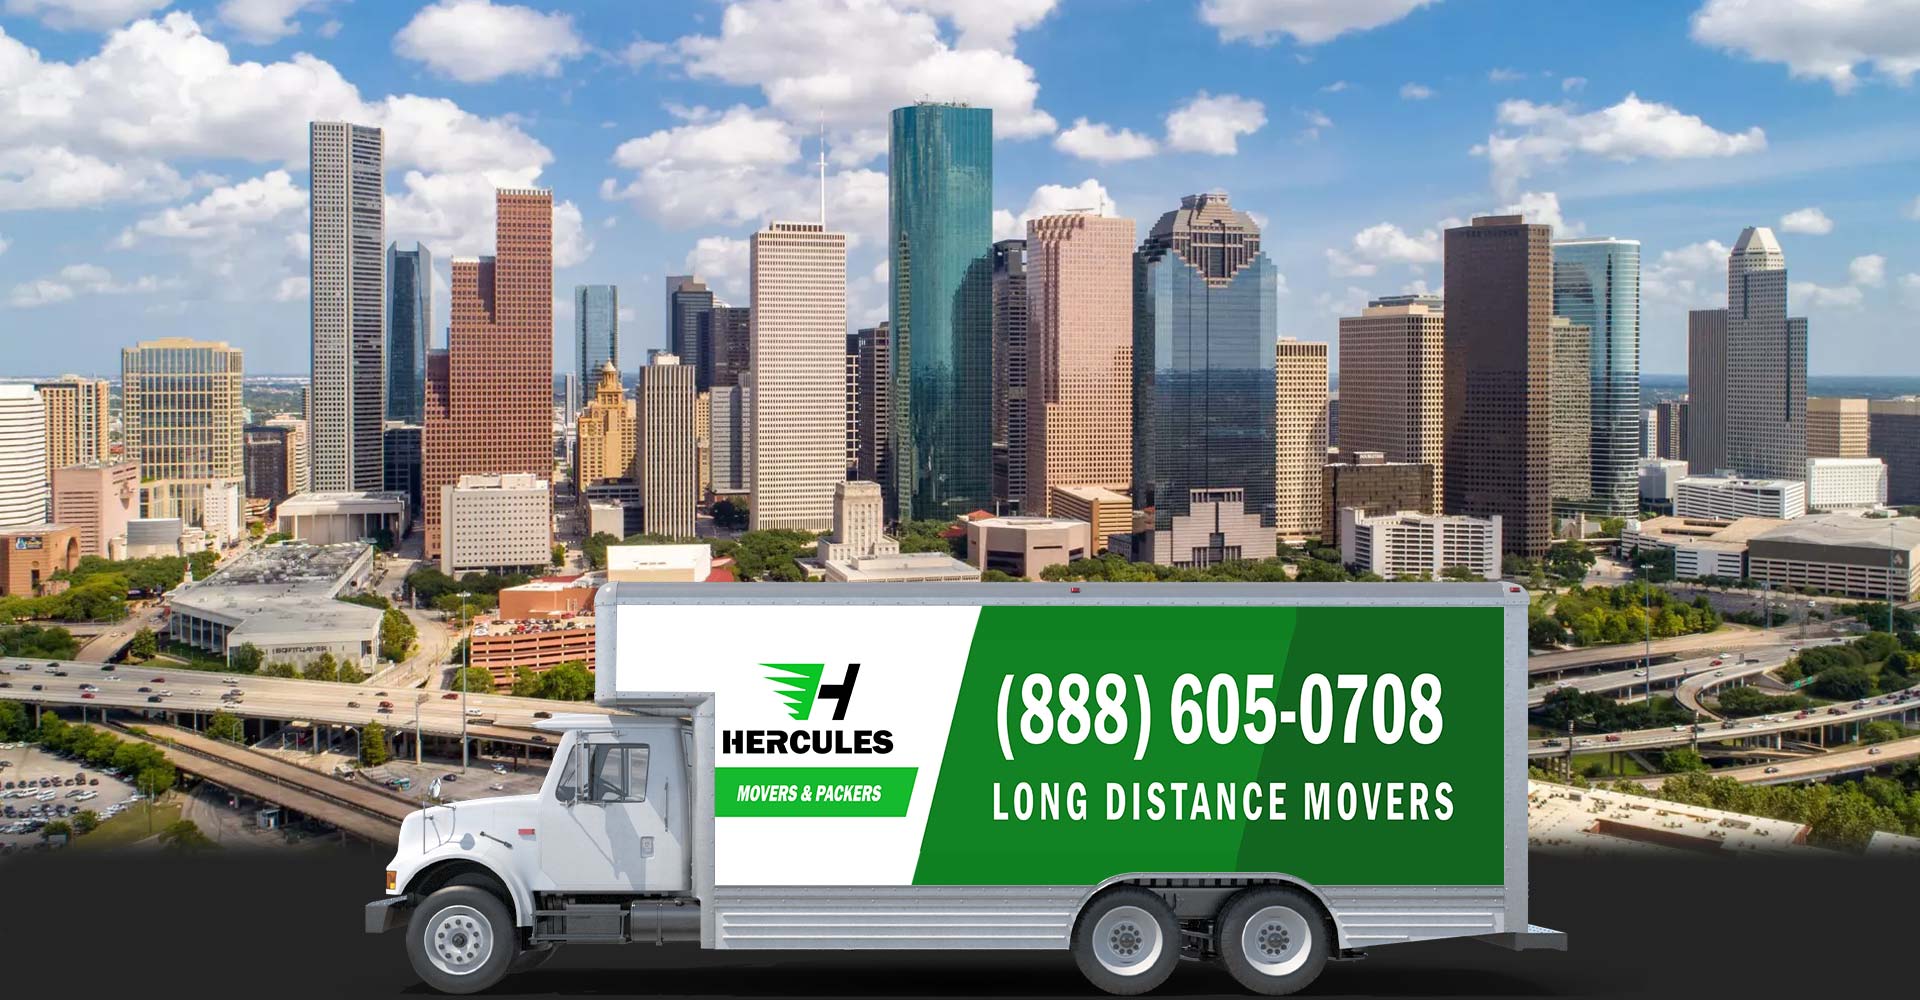 long distance movers in houston